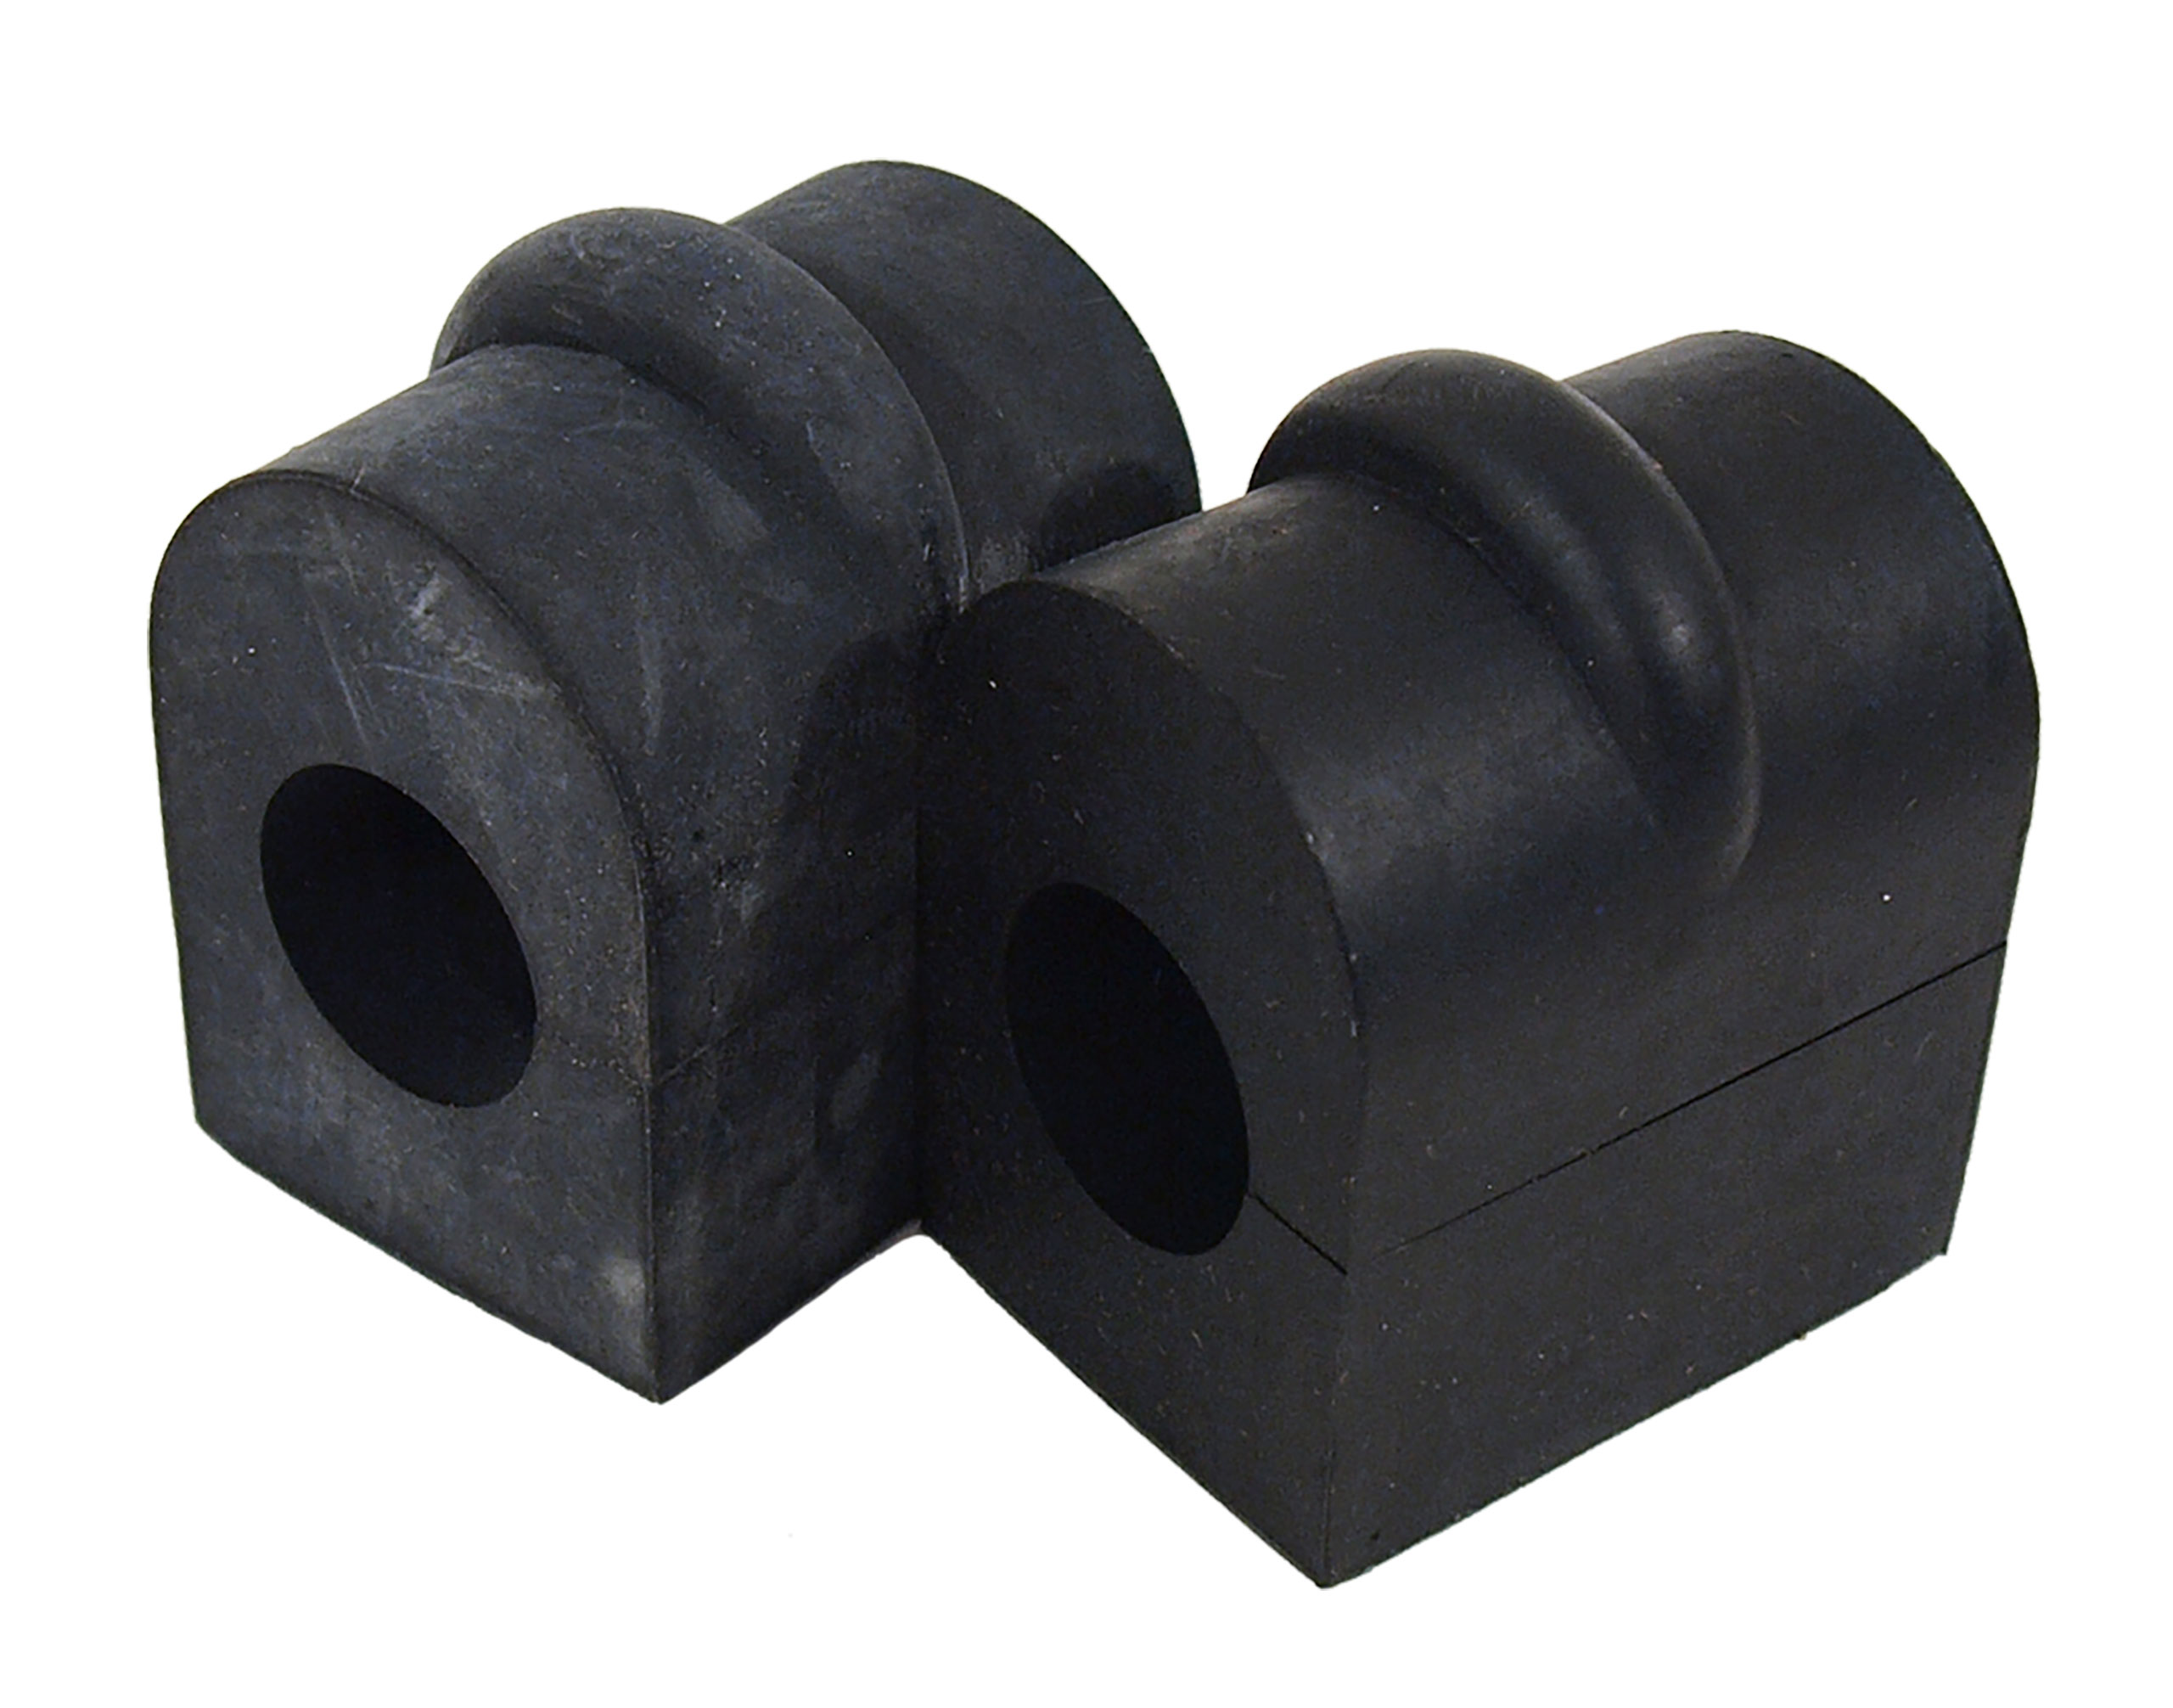 Auto Accessories of America 1957-1962 Chevrolet Corvette Front Sway Bar Bushings. Rubber 13/16 Inch